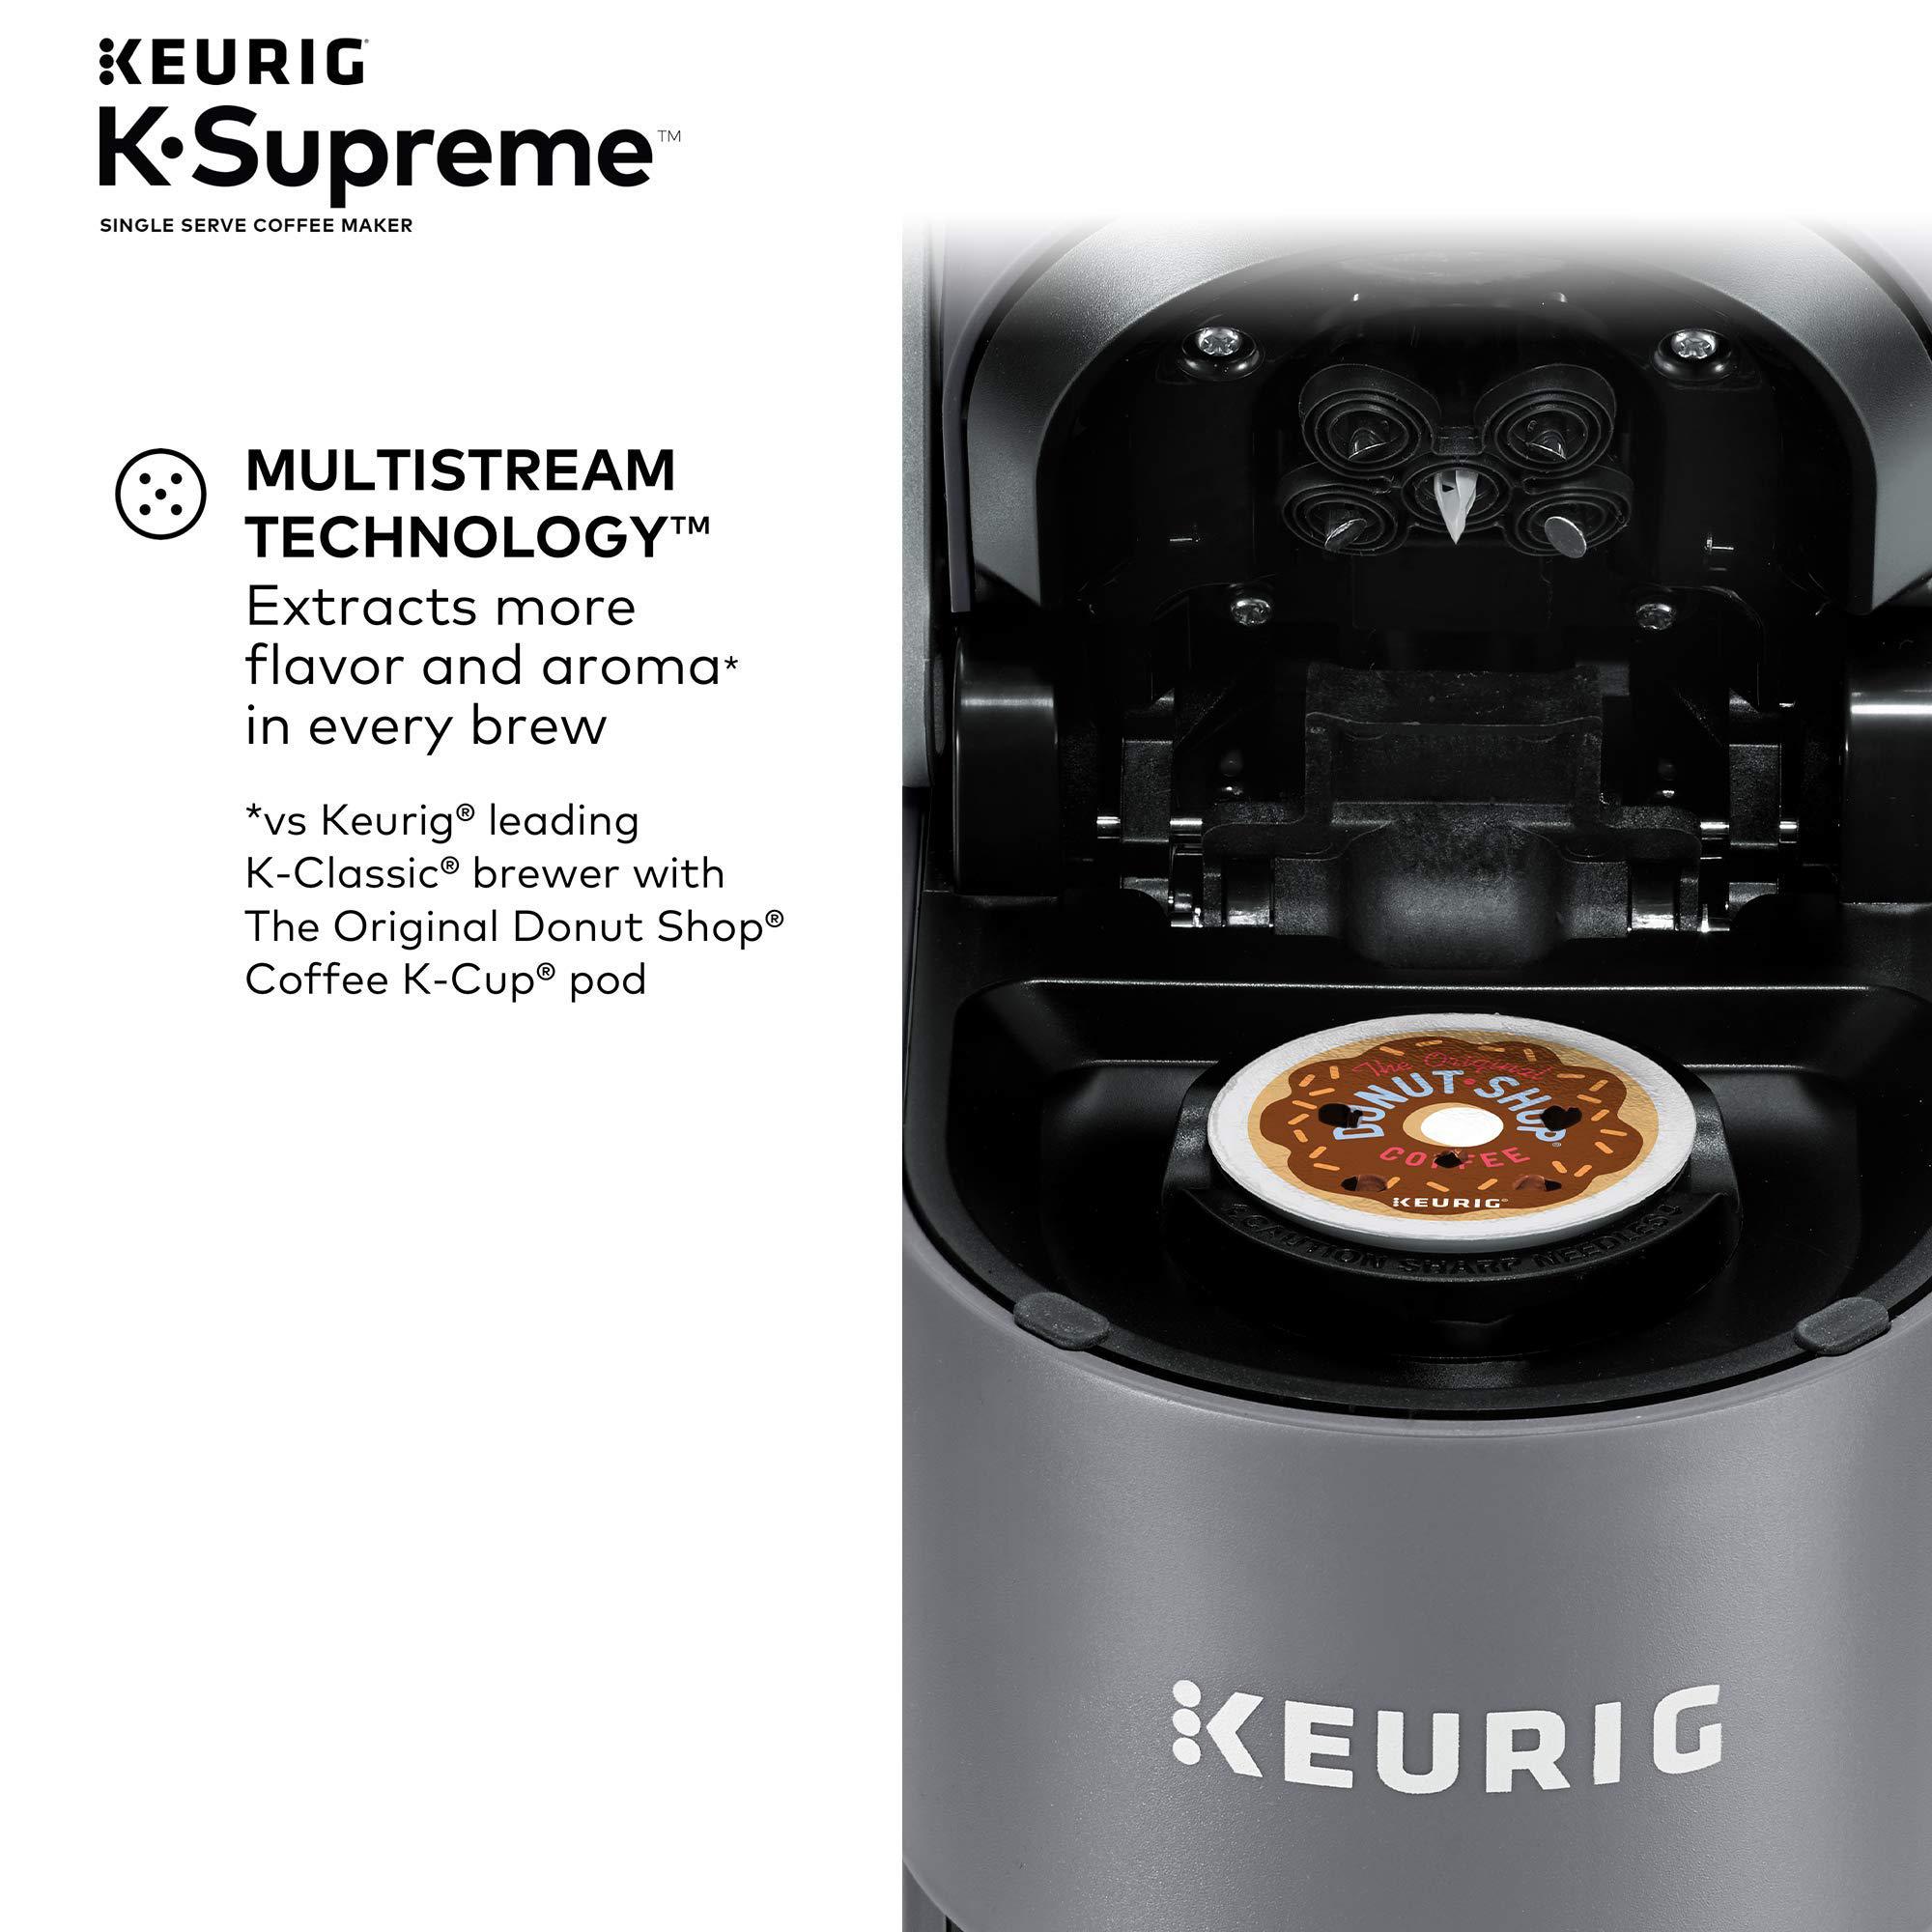 keurig k-supreme coffee maker, single serve k-cup pod coffee brewer, with multistream technology, 66 oz dual-position reservo